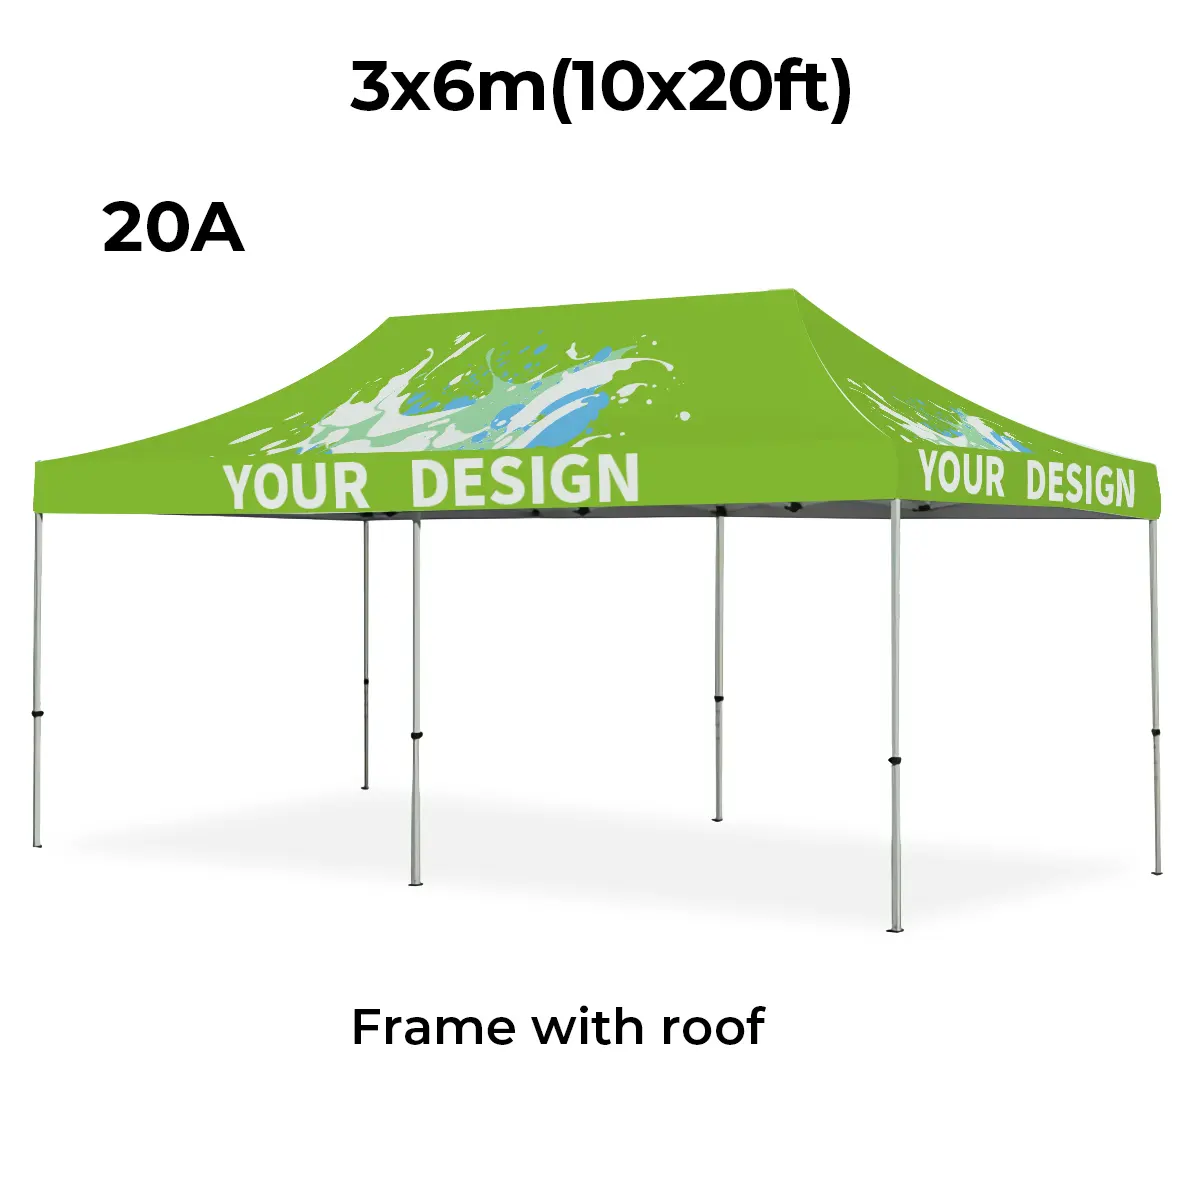 Show Tent Aluminum Frame Folding Waterproof Gazebo Pop Up Canopy Tent For Printed 10x10 10x20 Outdoor Event Party Trade Show Custom Logo